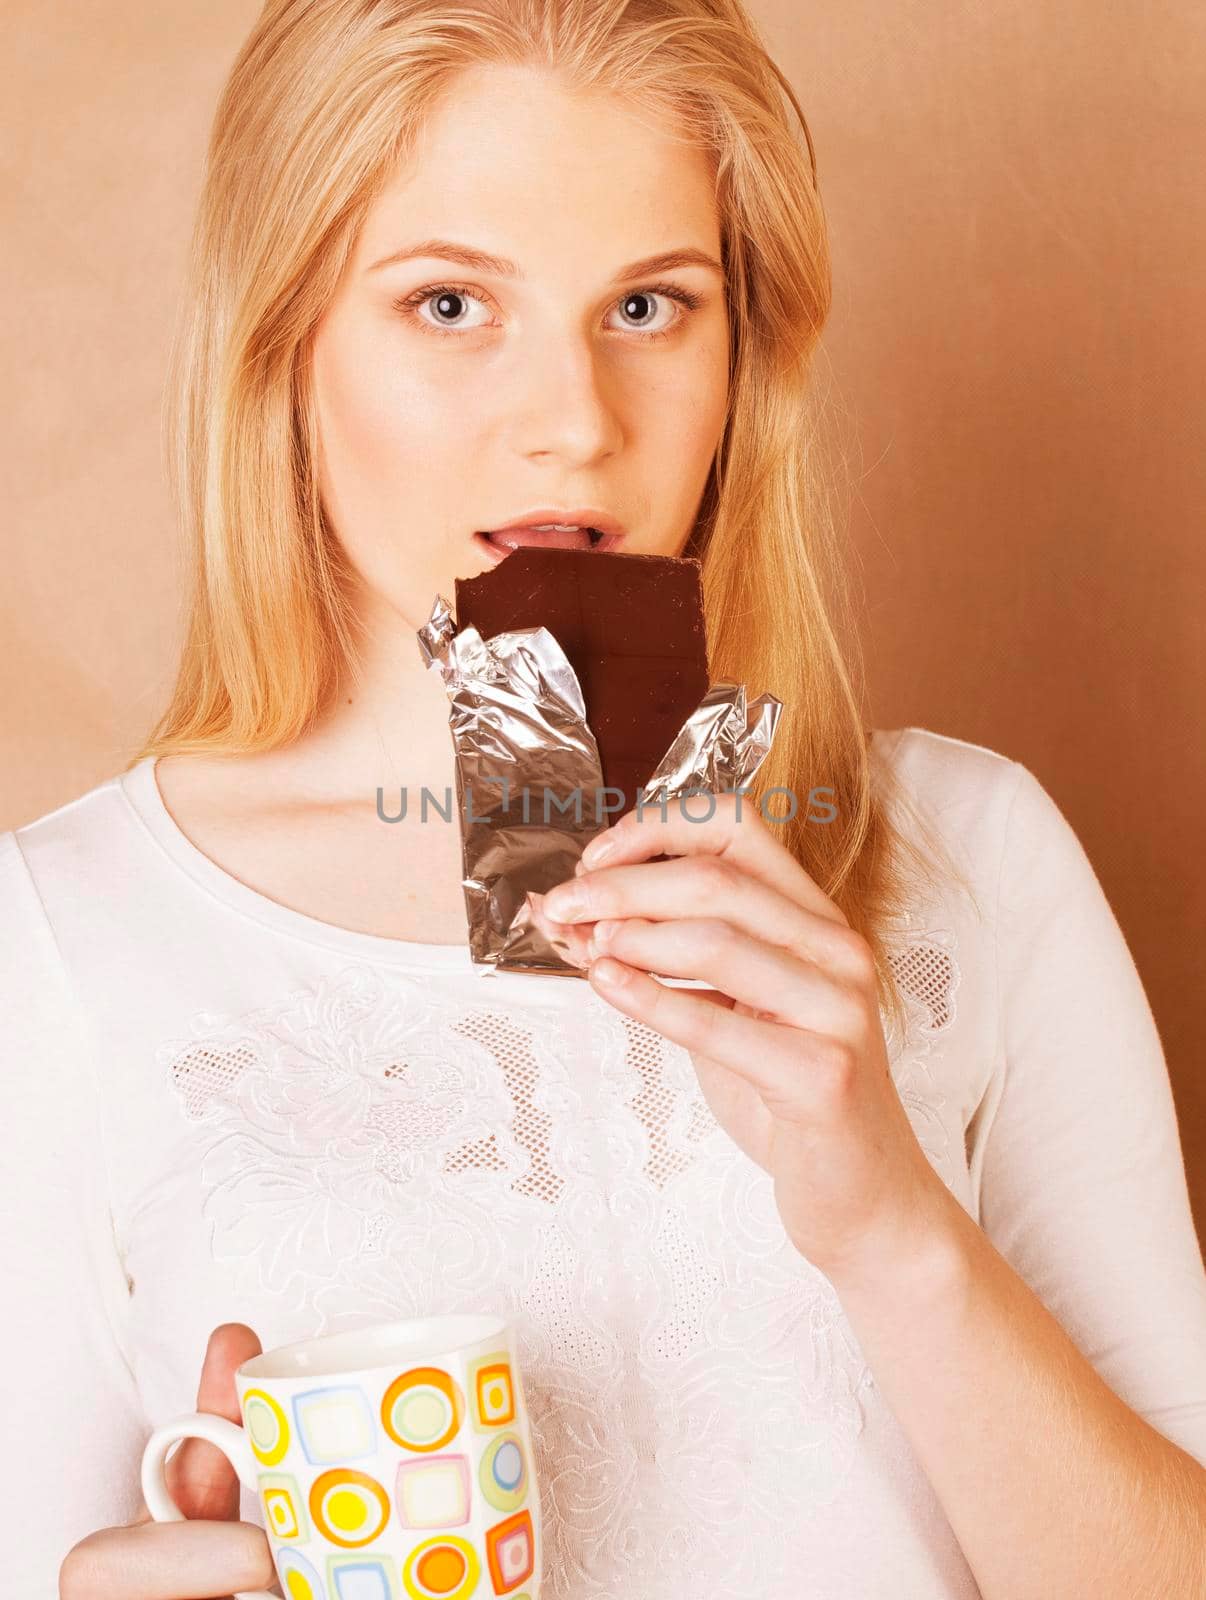 young cute blond girl eating chocolate and drinking coffee close up on warm background